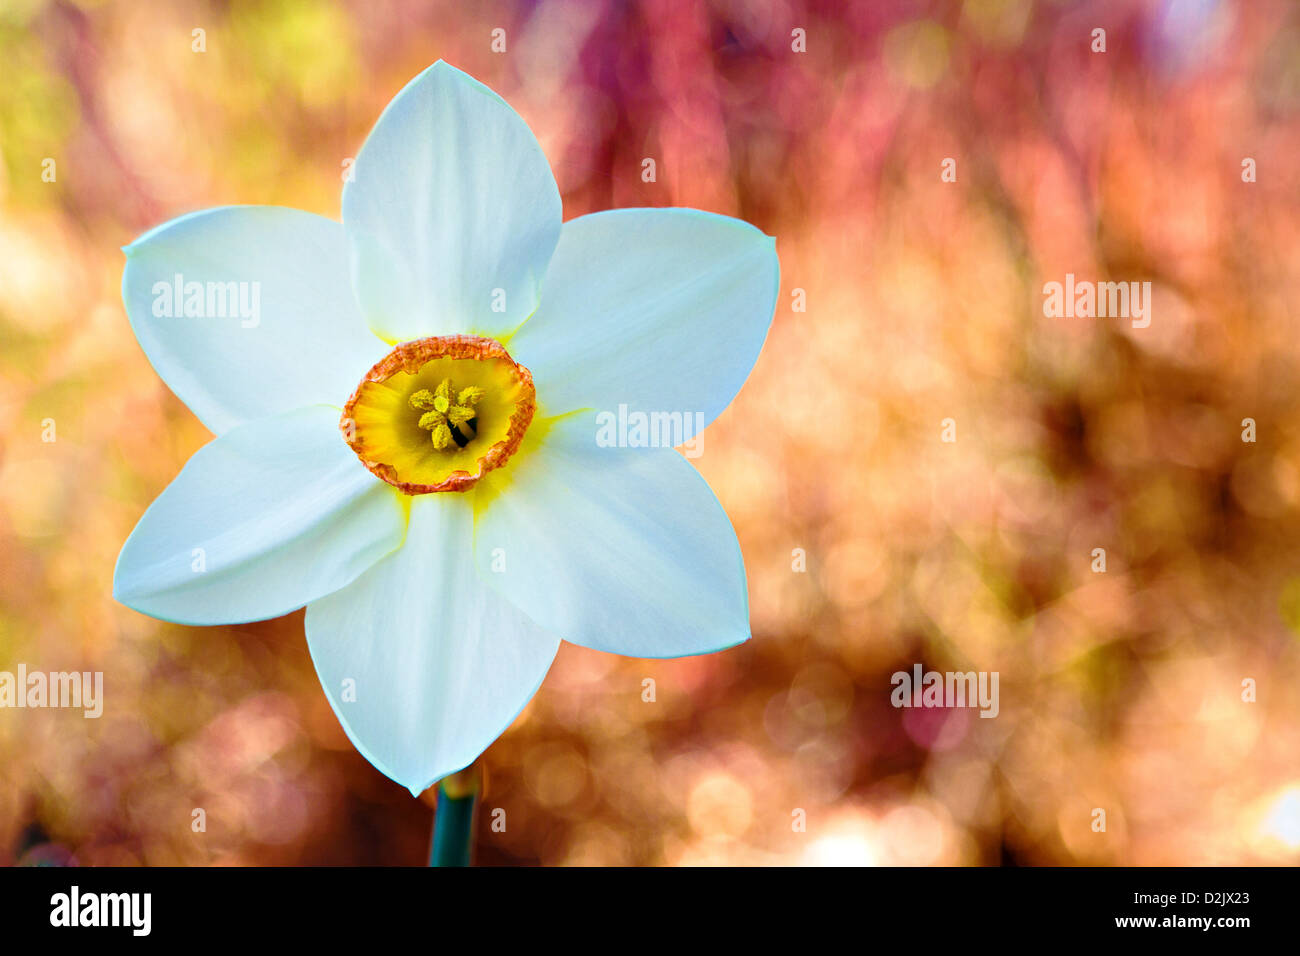 White daffodil with yellow center against spring-like pastel bokeh background Stock Photo